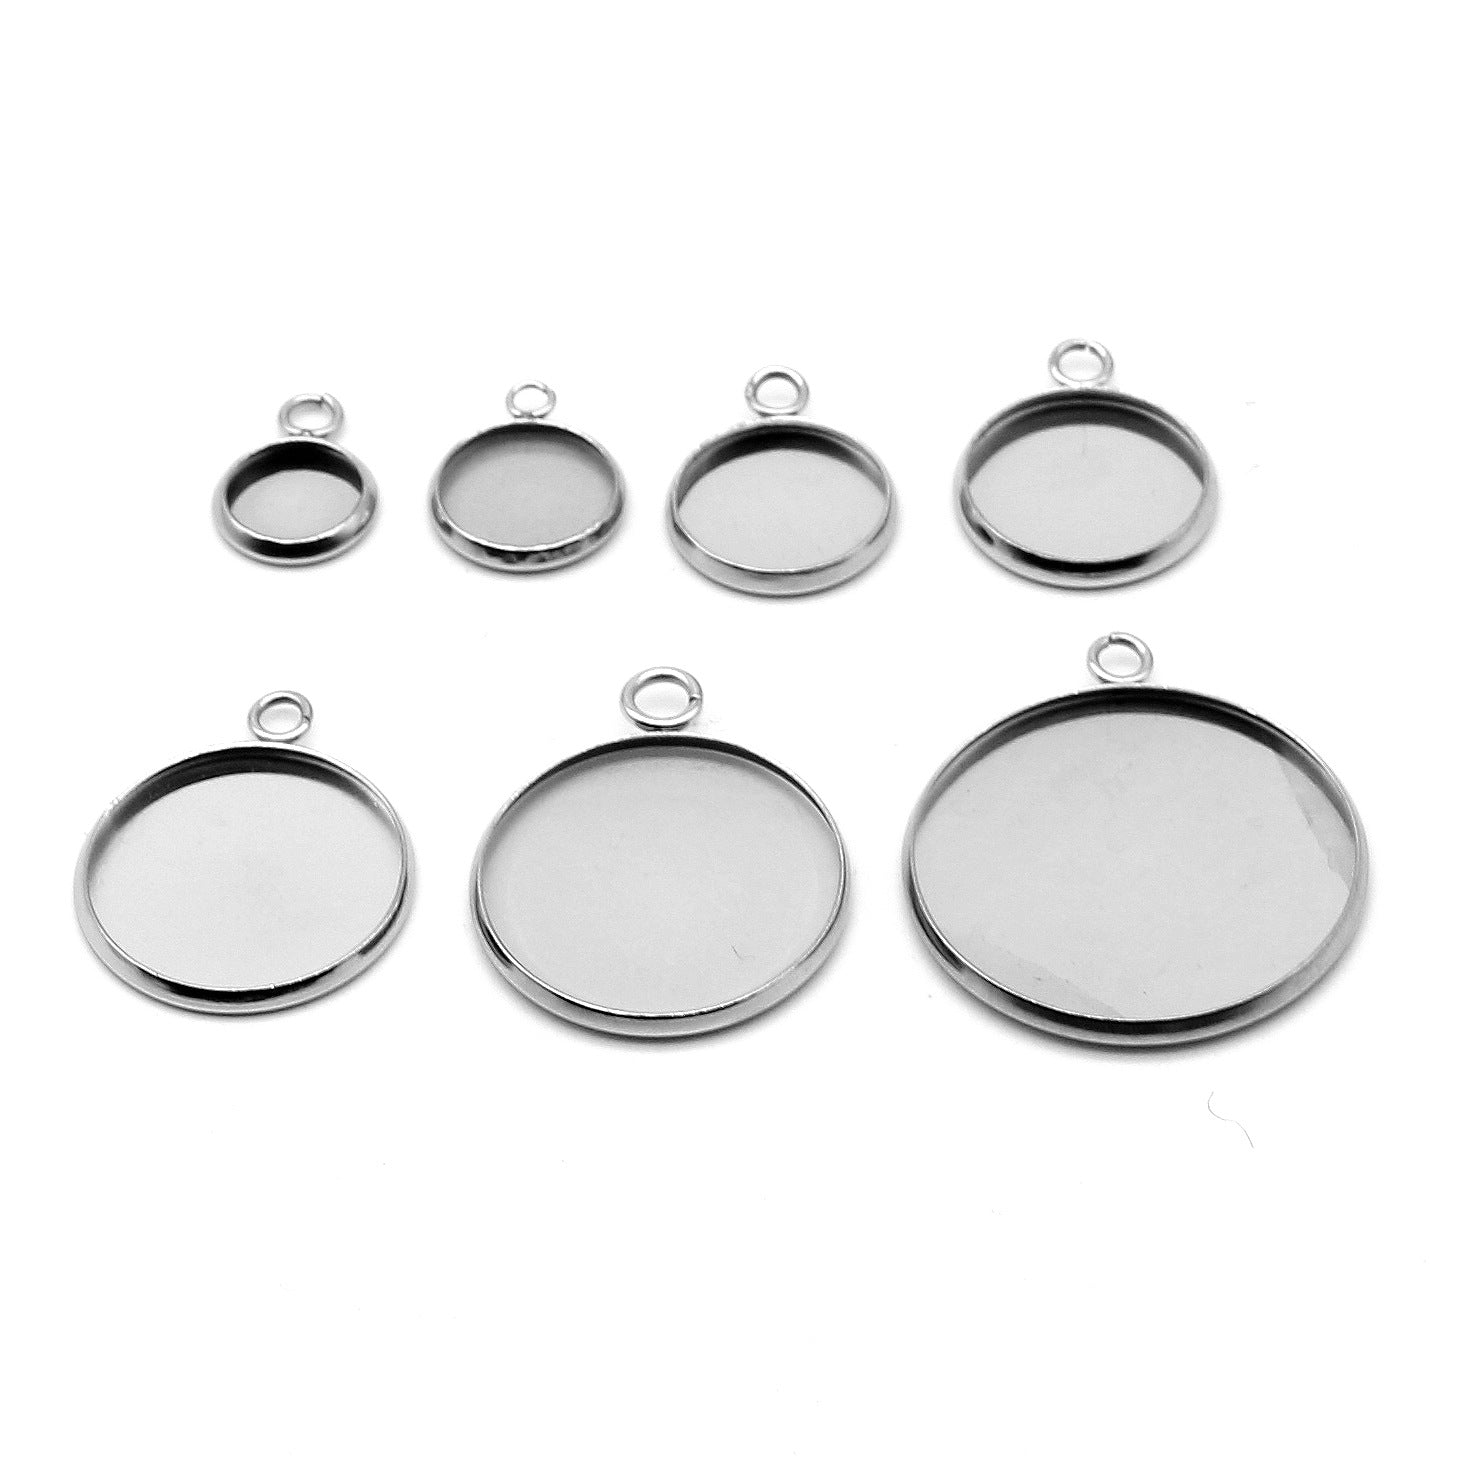 Pendant Trays, Bezel Pendant Trays Blanks With Glass Cabochons For